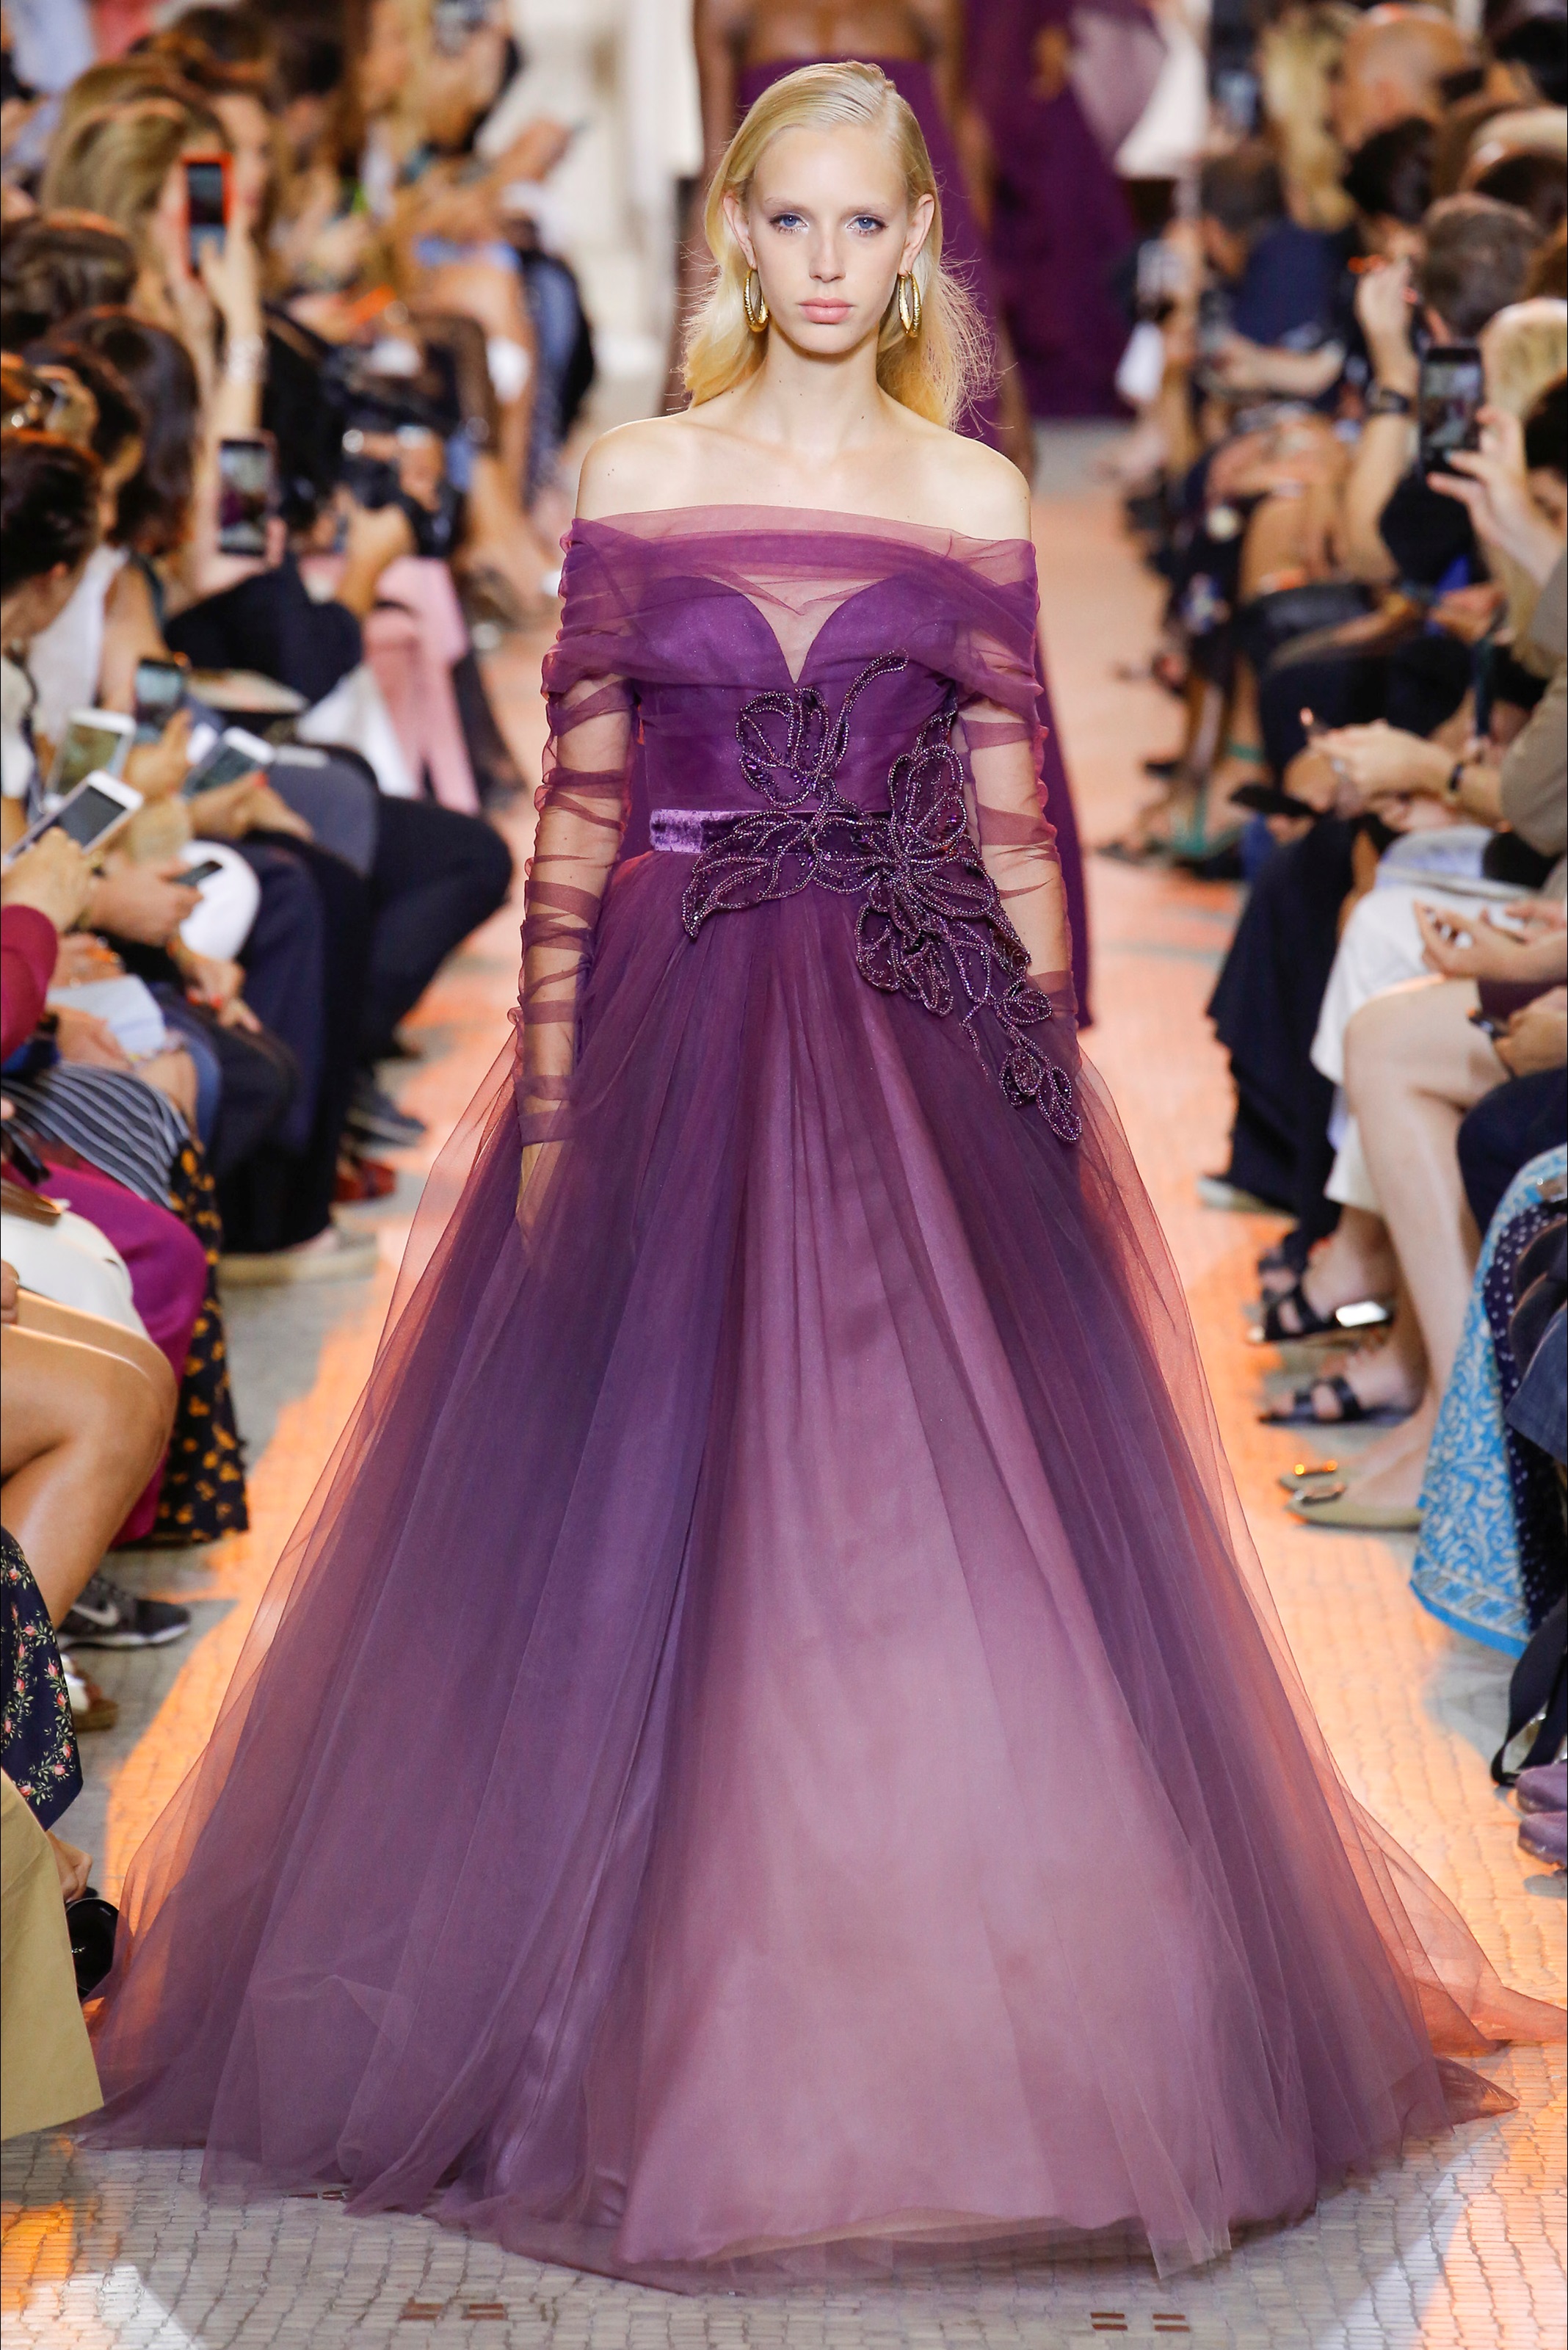 Stunning! Elie Saab's AW18/19 Collection Is Definitely For The Opulent ...